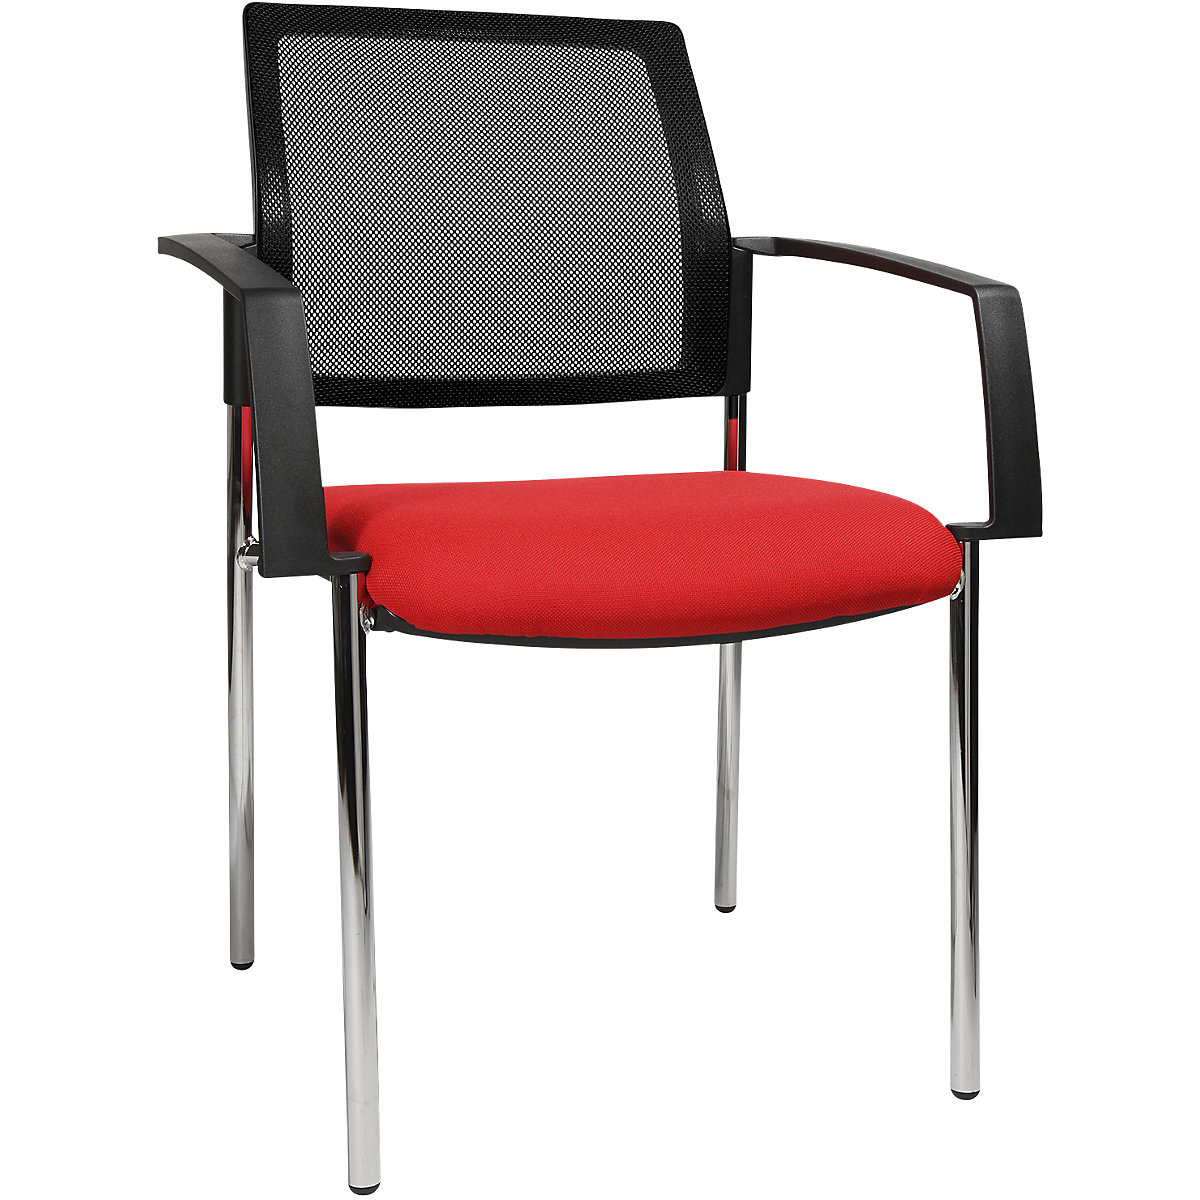 Mesh stacking chair – Topstar, 4-leg, pack of 2, red seat, chrome frame-6